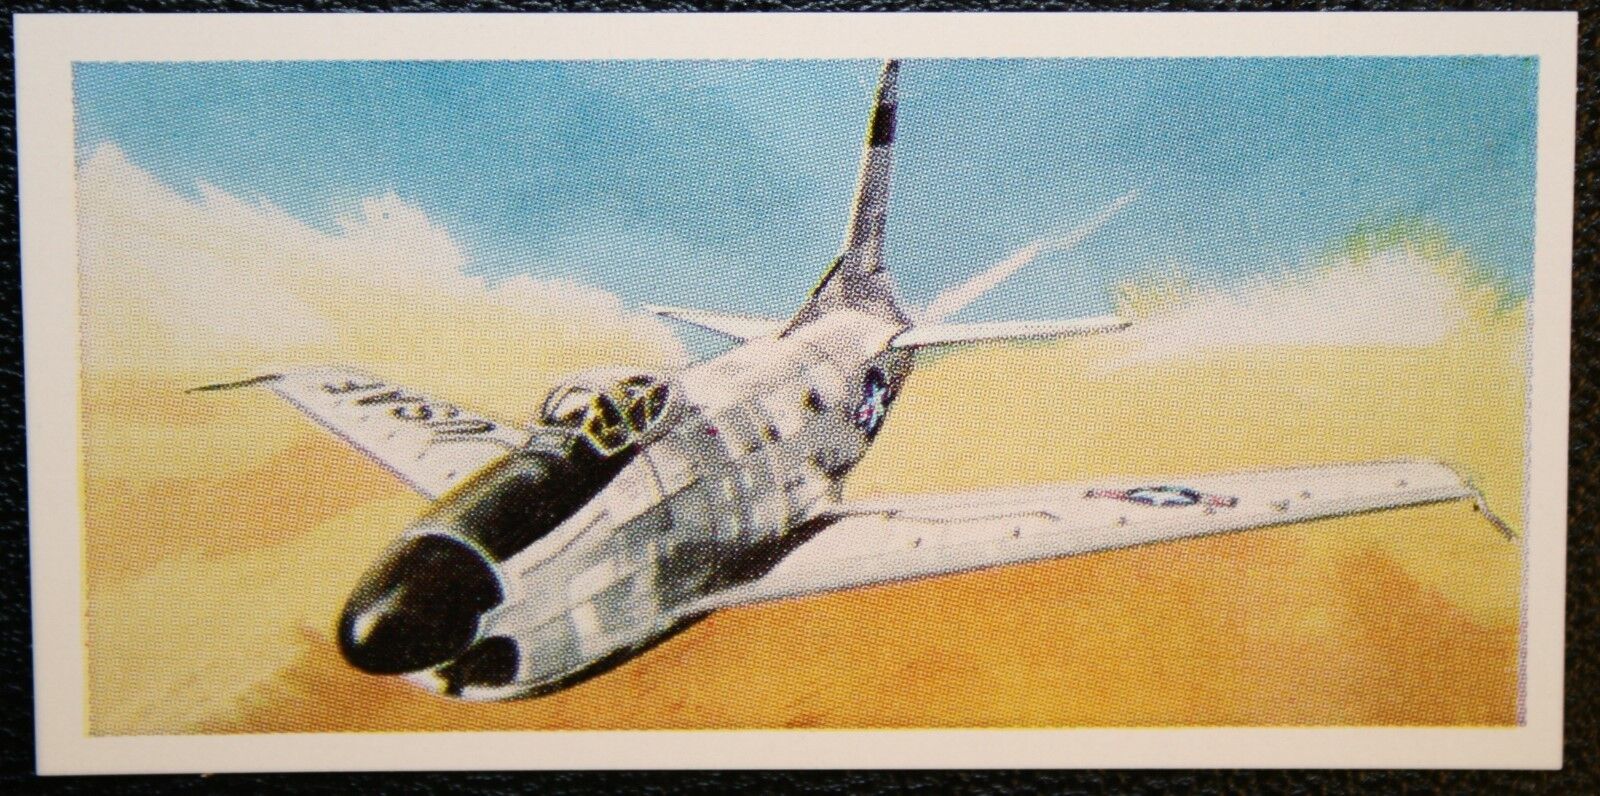 NORTH AMERICAN F86 SABRE  Jet Fighter     Illustrated  Card  OC31